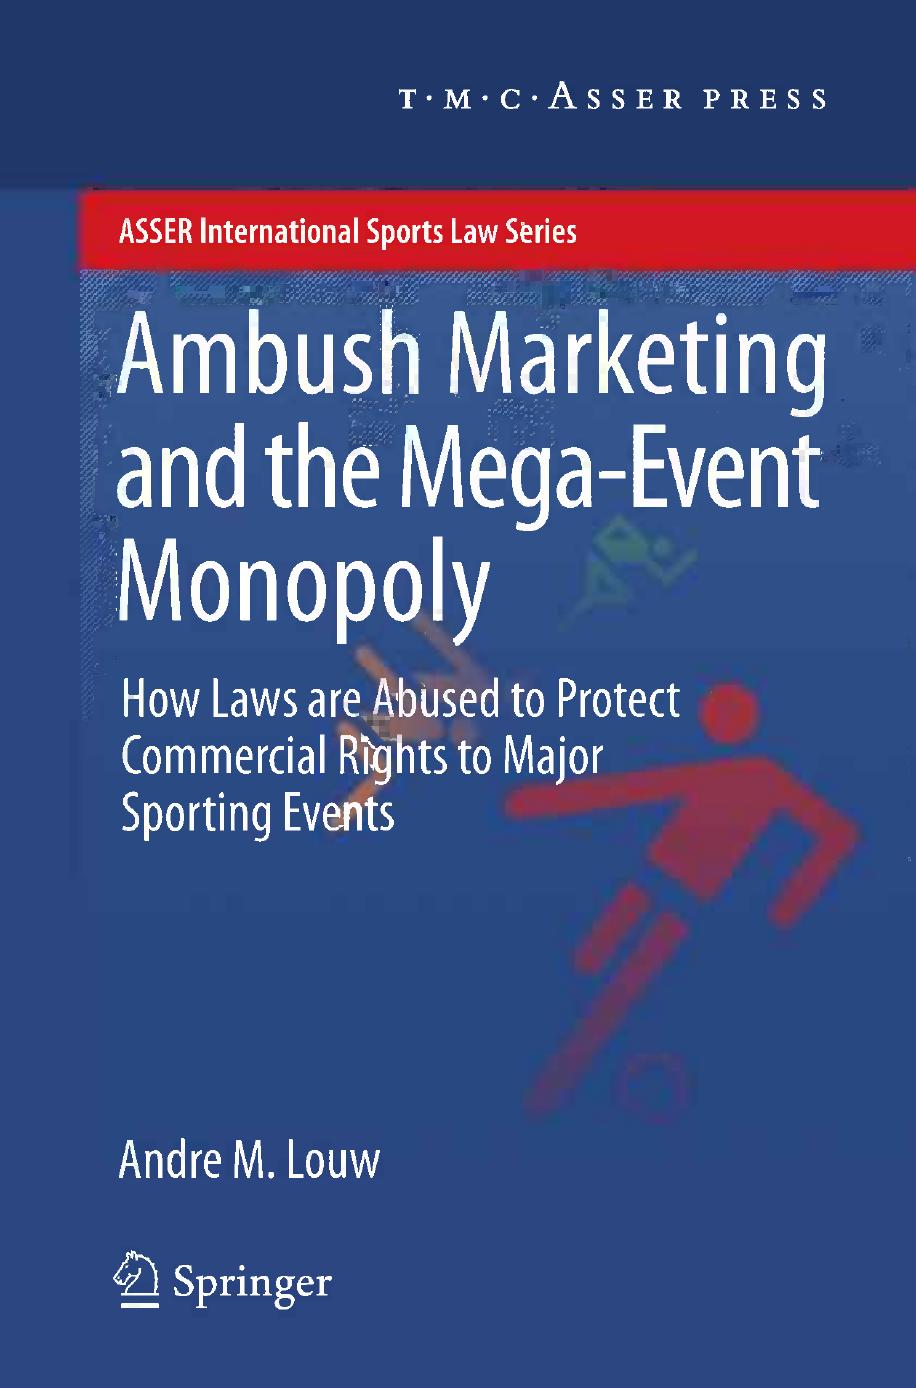 (ASSER International Sports Law Series) Andre M. Louw (auth.)-Ambush Marketing & the Mega-Event Monopoly How Laws are Abused to Protect Commercial Rights to Major Sporting Events-T.M.C. Asser Press (